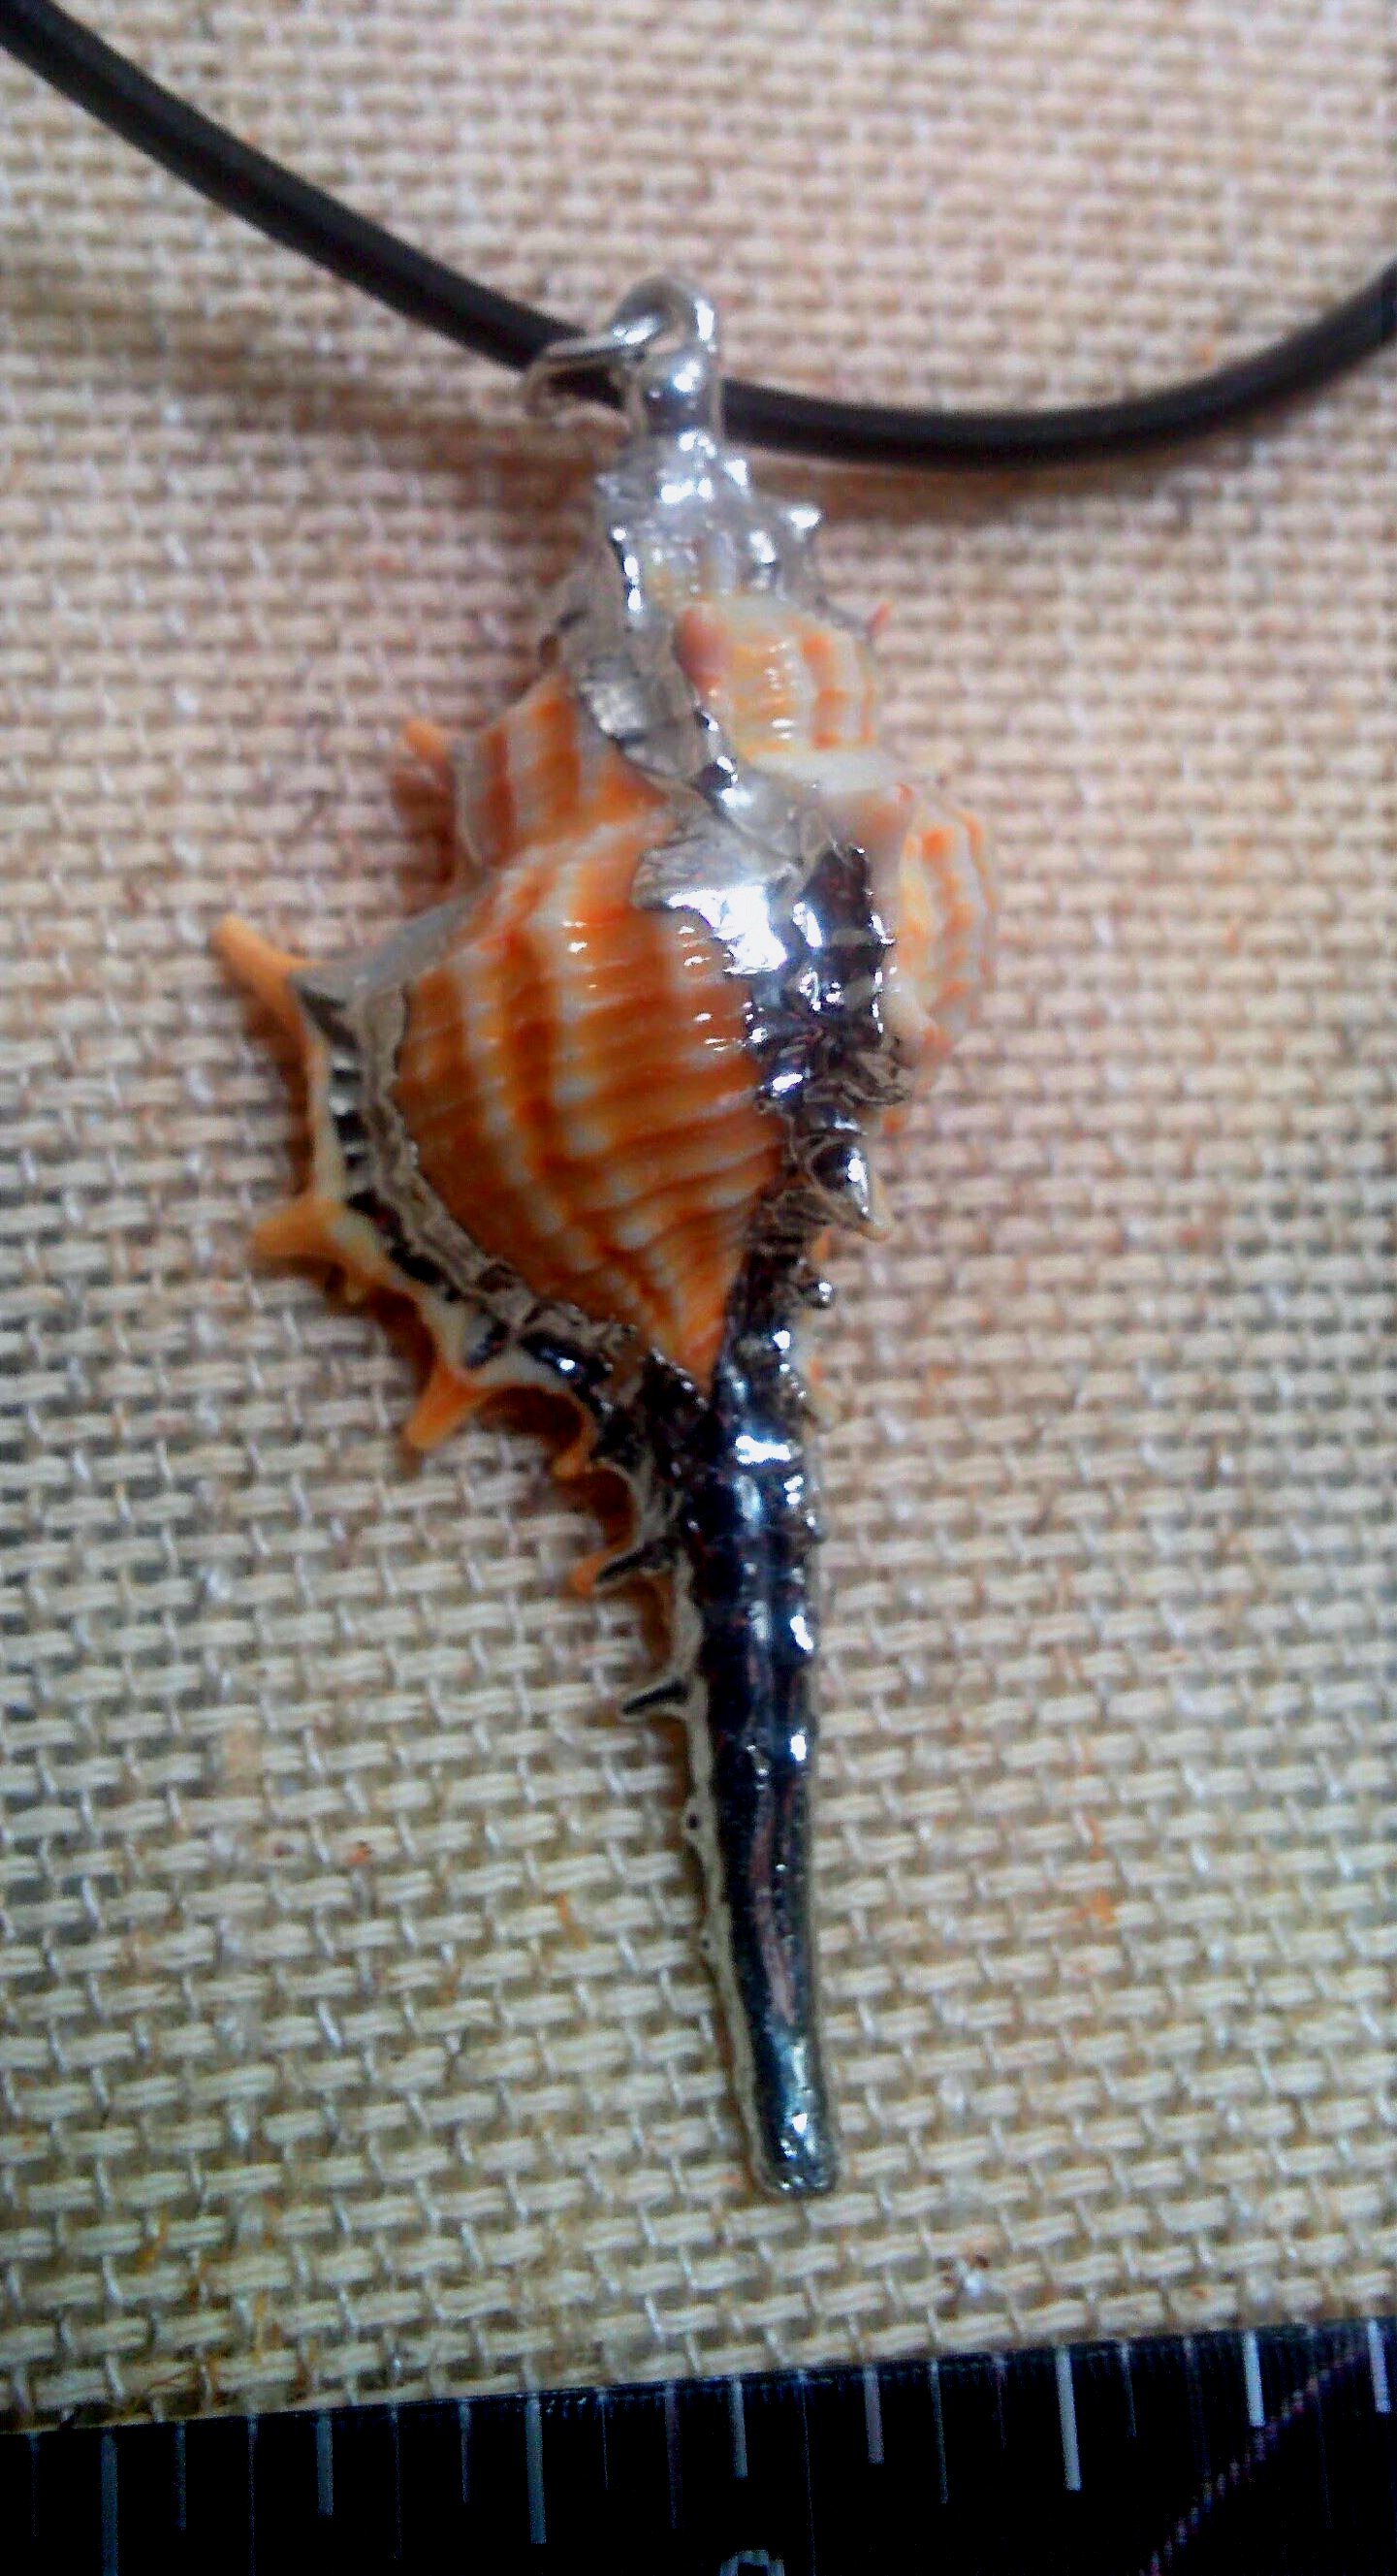 natural sea shell and leather cord necklace